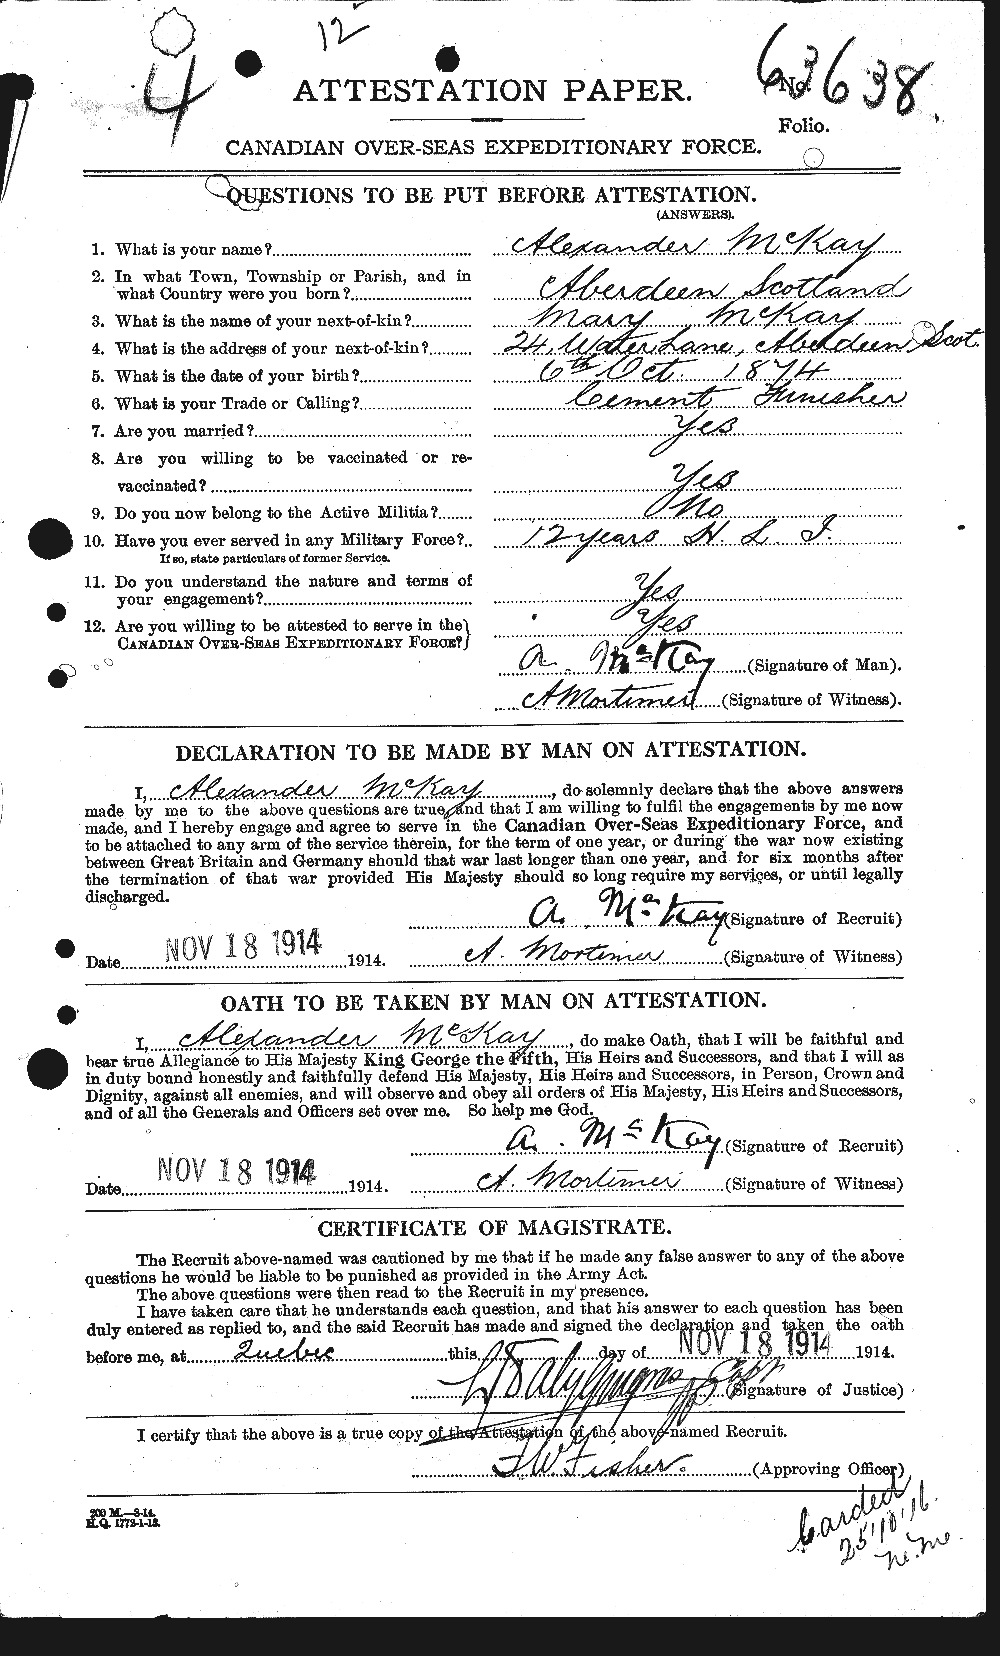 Personnel Records of the First World War - CEF 530923a